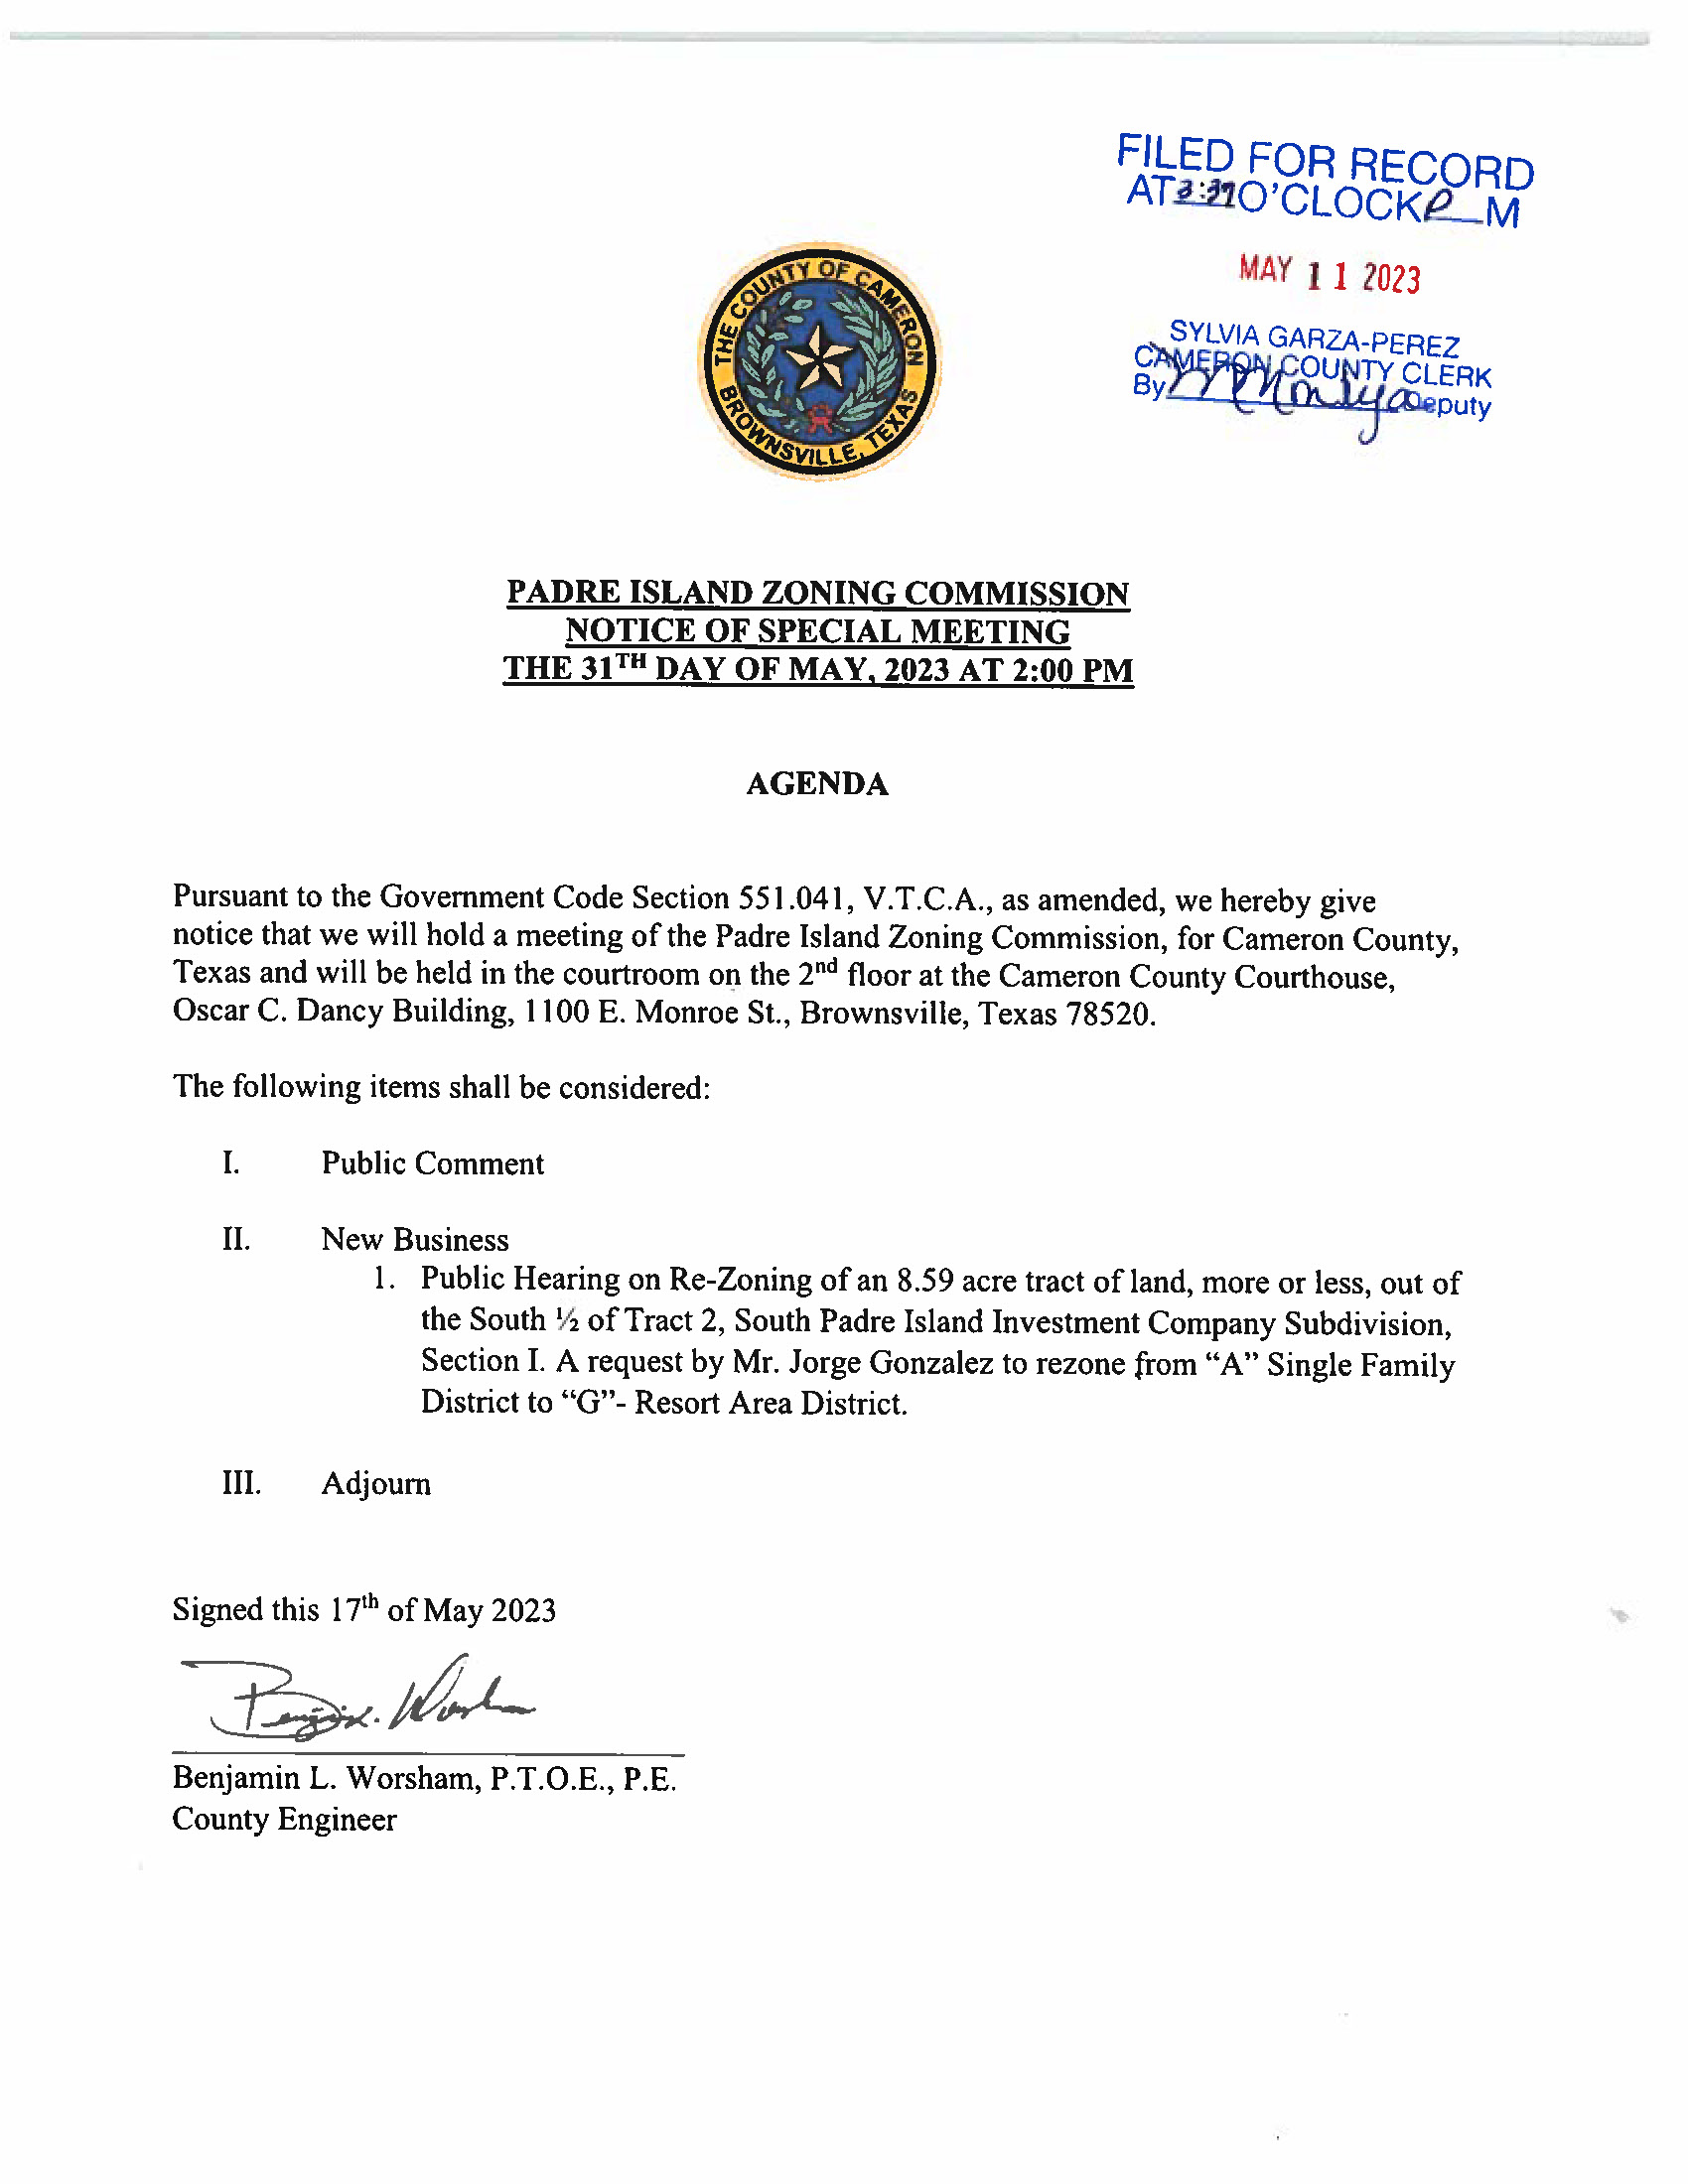 Padre Island Zoning Commission Notice Of Special Meeting